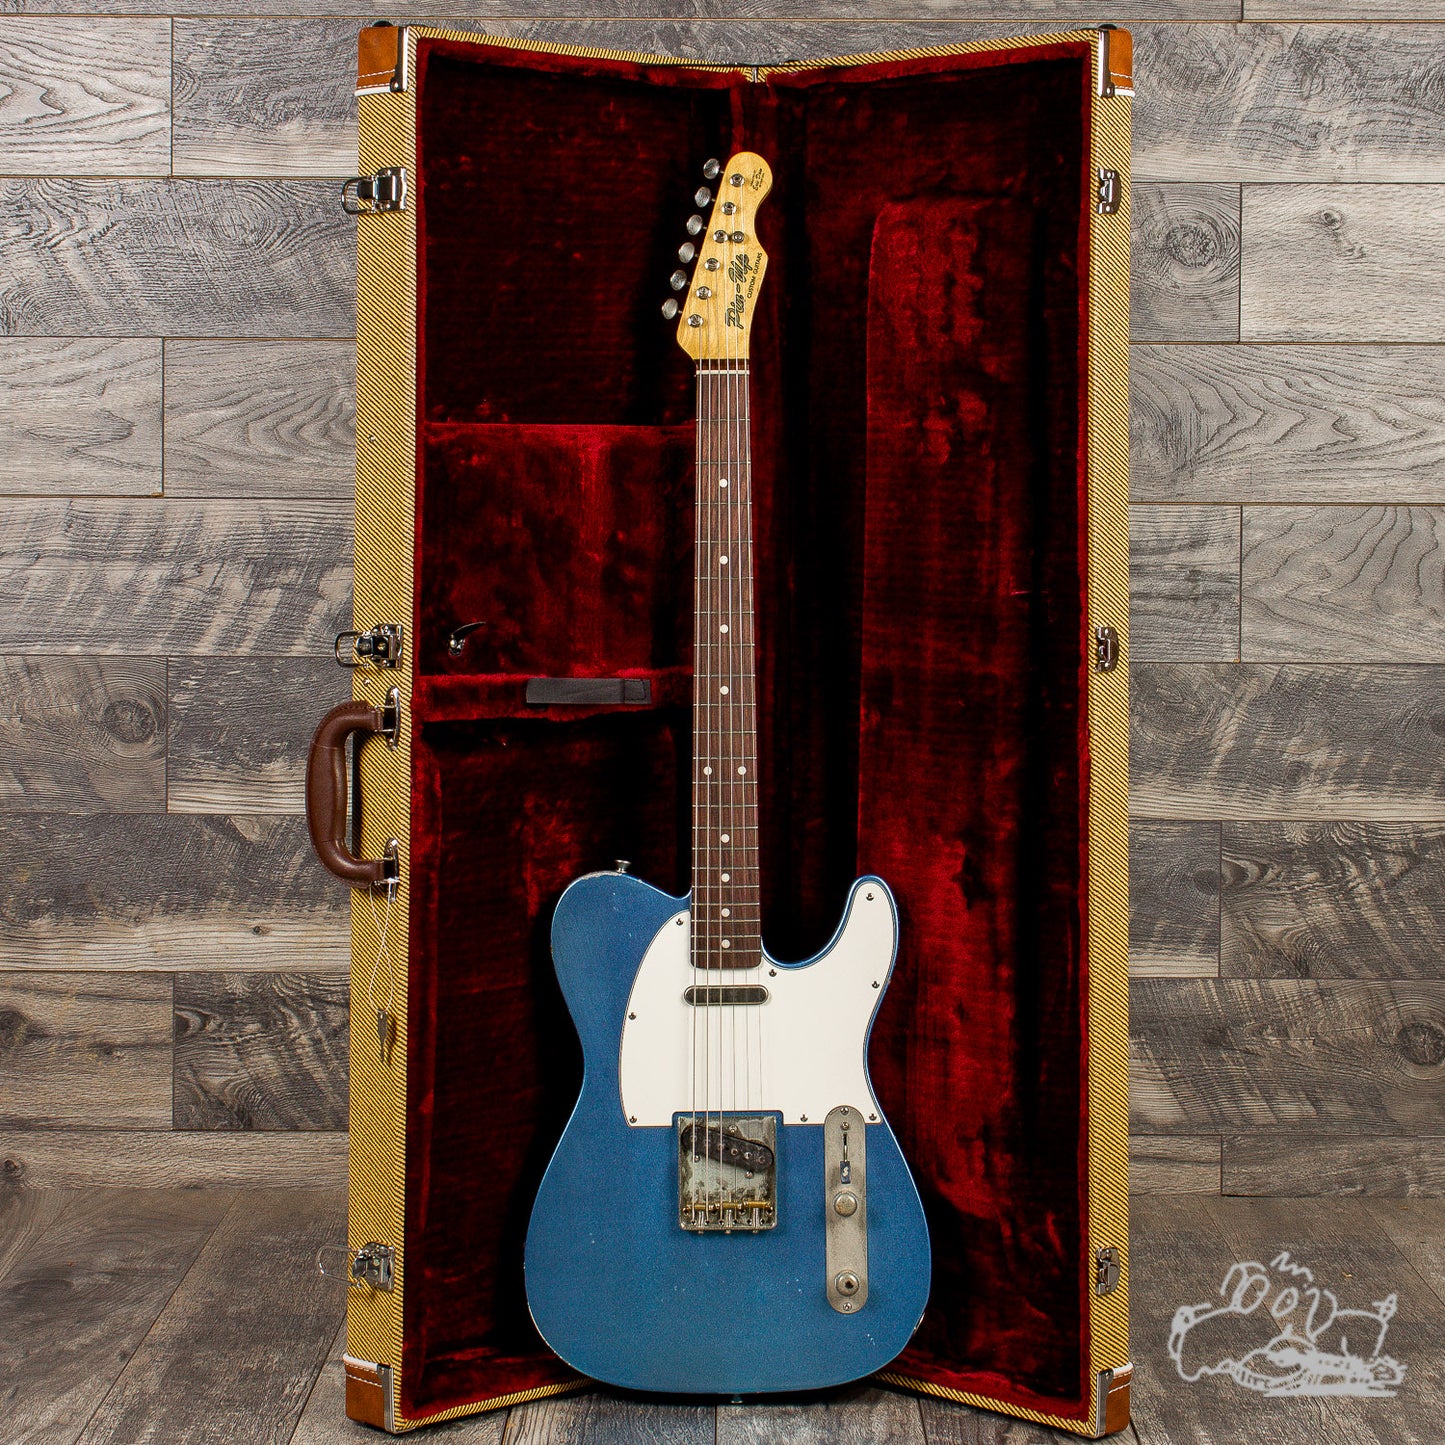 2020 Eric Daw Pinup T Style, Aged Ice Blue Metallic Relic, "Vicky"